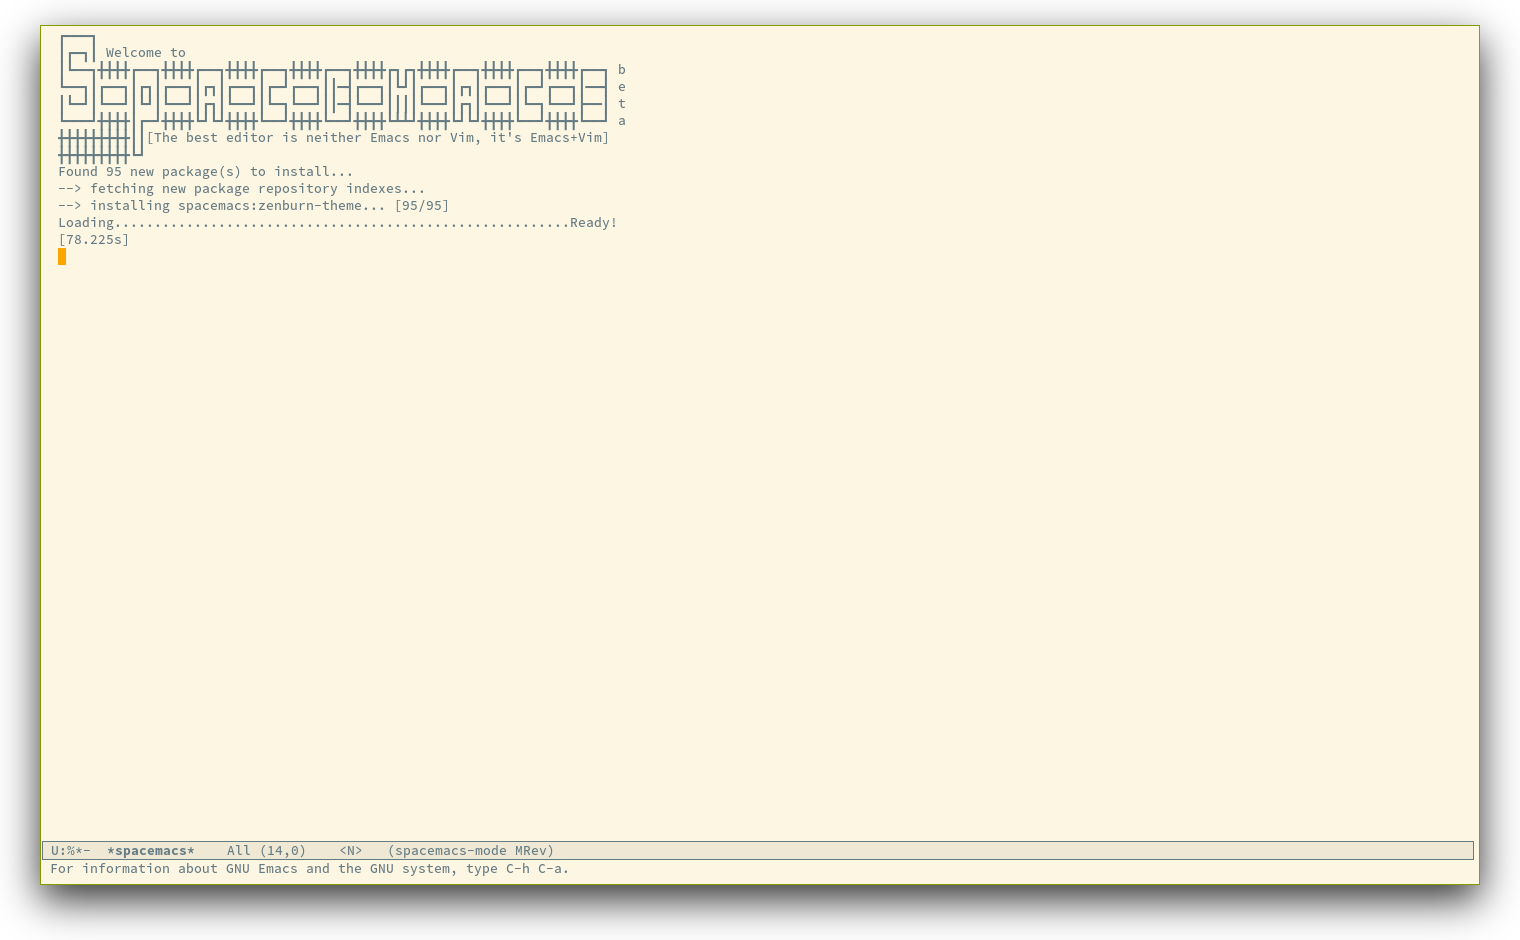 /TakeV/spacemacs/media/commit/91dcafe9936b862168eac0bce39ae2f48ecdc880/doc/img/spacemacs-startup.png